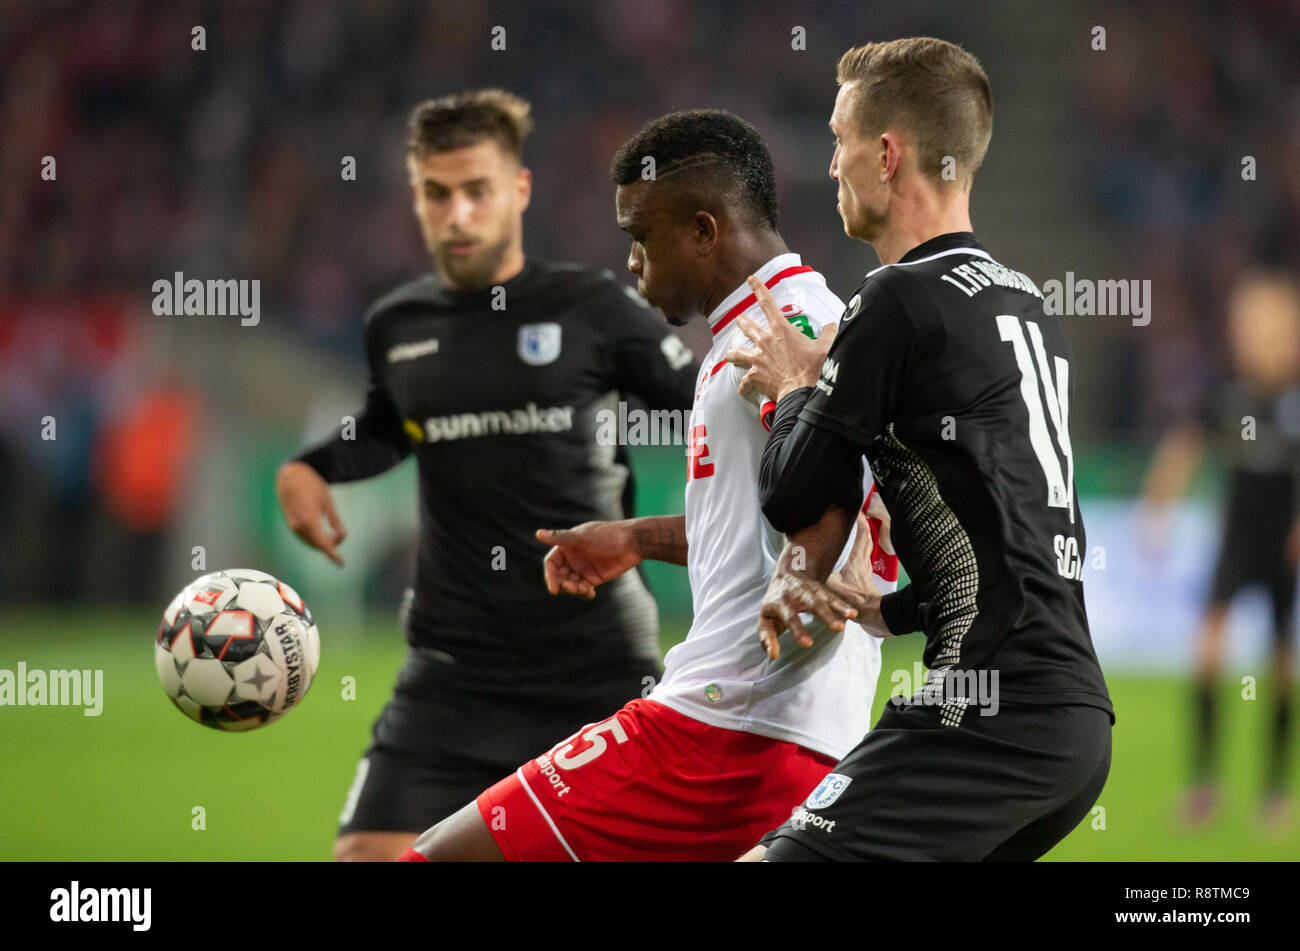 Cologne, Germany 17th December 2018, 2nd League, 1. FC Koeln vs 1. FC Magdeburg: Jhon Cordoba (Koeln), Steffen Schaefer (Magdeburg) in competition.   DFL REGULATIONS PROHIBIT ANY USE OF PHOTOGRAPHS AS IMAGE SEQUENCES AND/OR QUASI-VIDEO             Credit: Juergen Schwarz/Alamy Live News Stock Photo